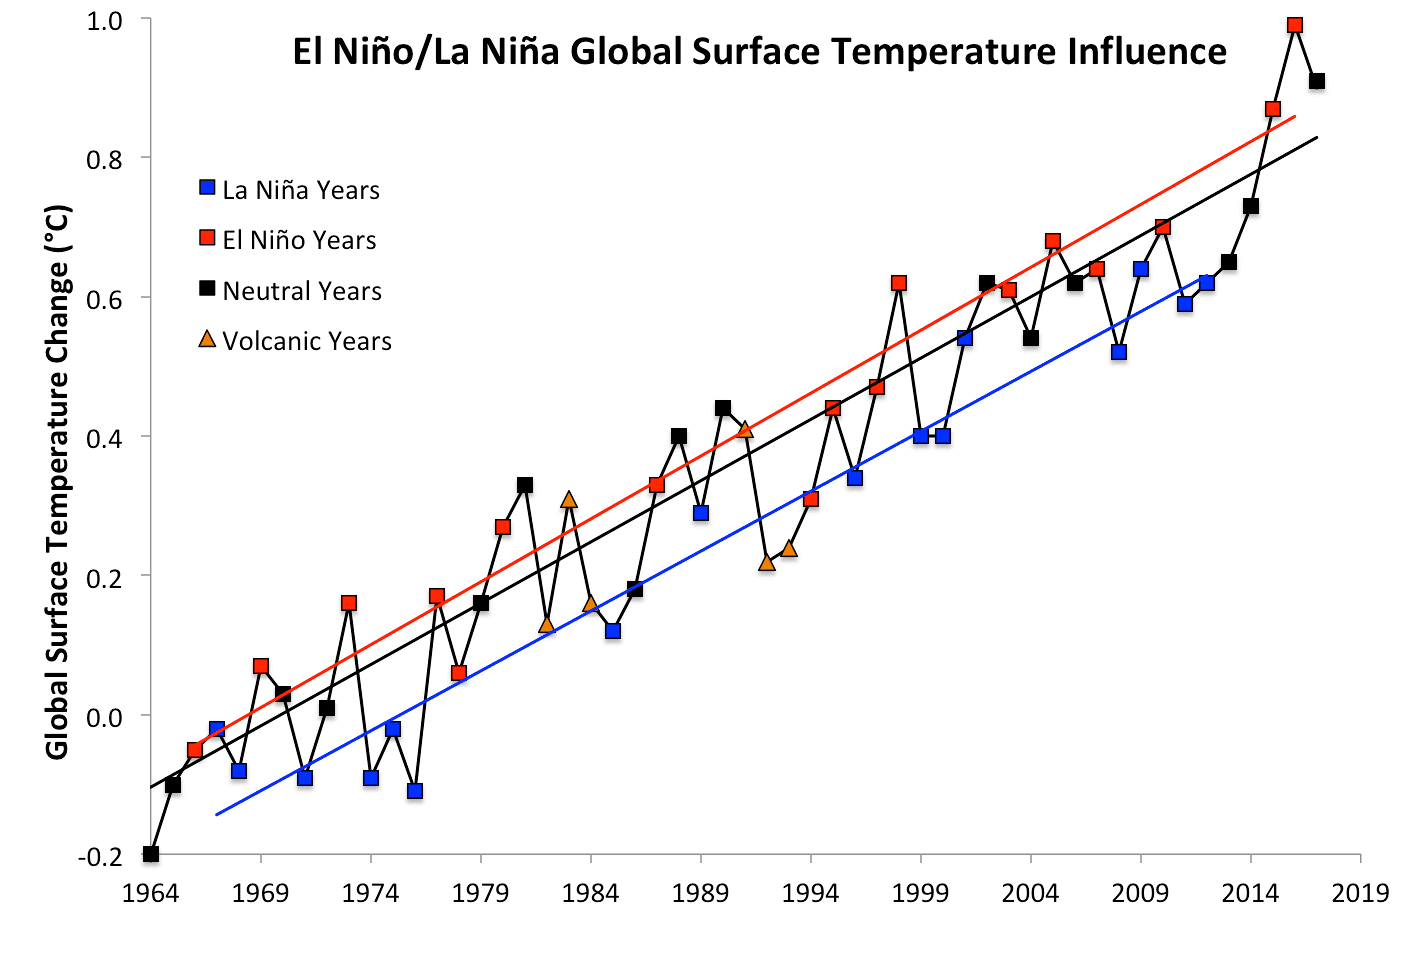 1964–2017 global surface temperature data from Nasa (Nuccitelli, 2018).